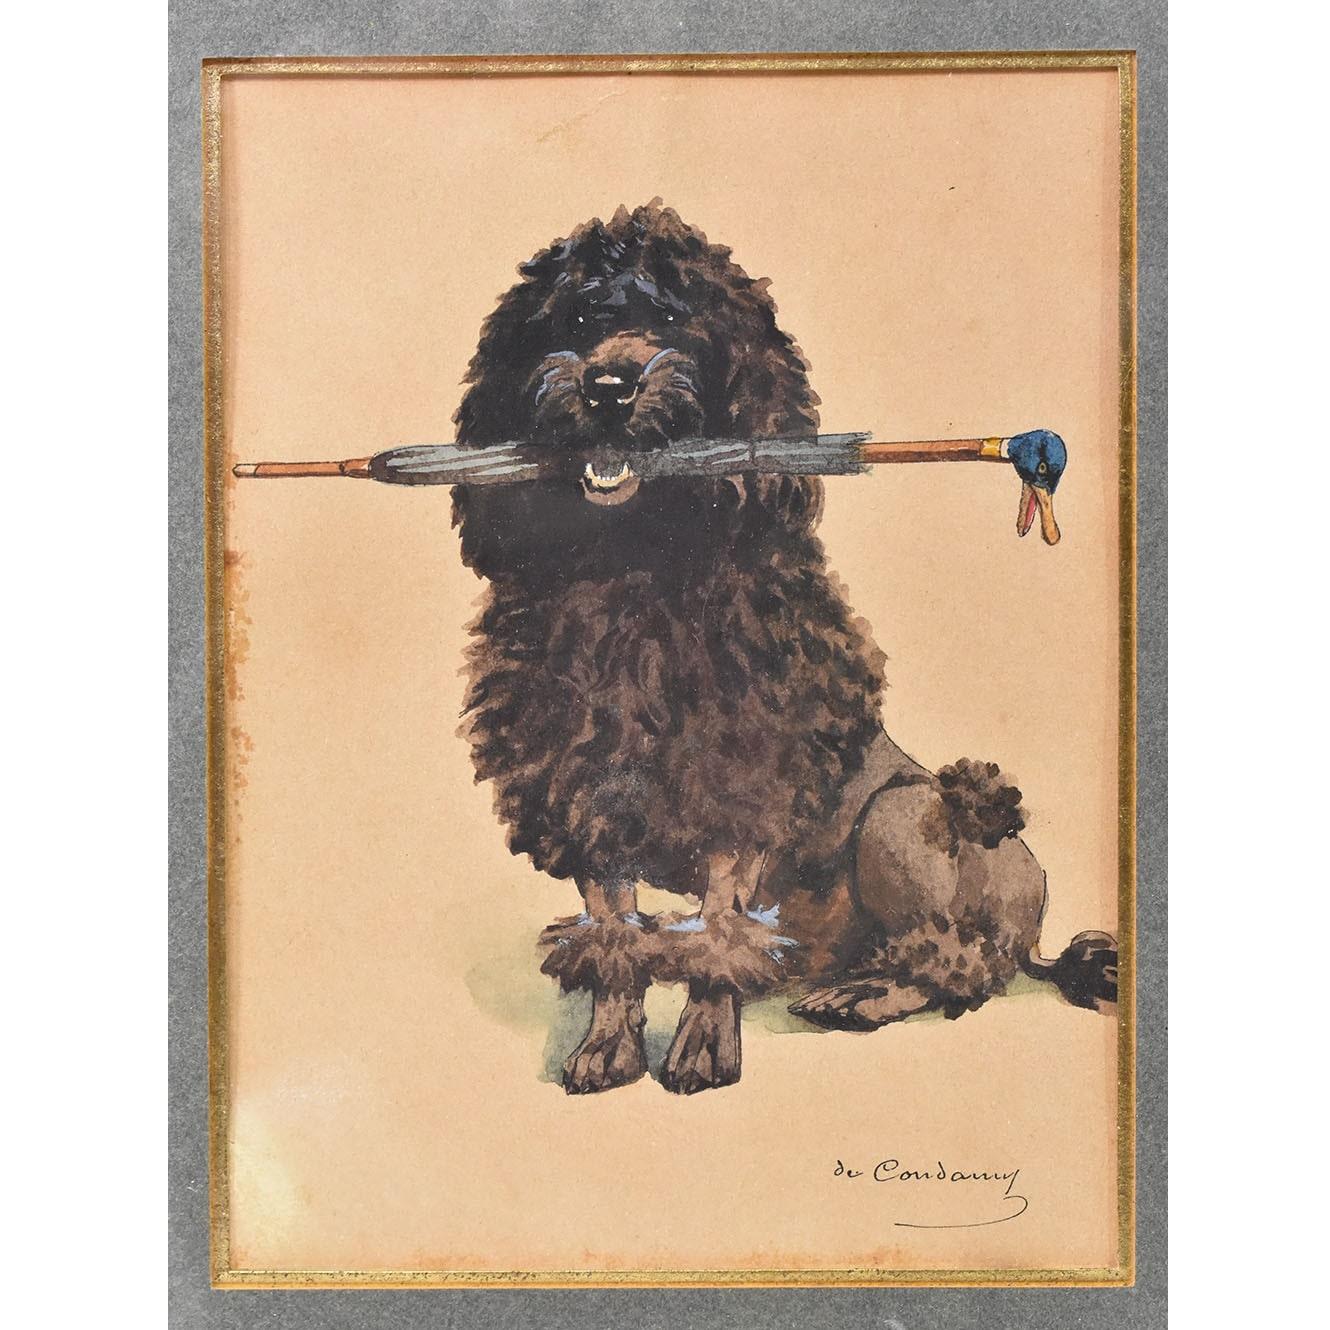 The category Antique Paintings Portraits of Dogs features a small painting, a Watercolor on paper with
a portrait of a Black Poodle dog, late 1800s era.  

This is a pleasant portrait of a small dog, a black-haired poodle 
carrying a small